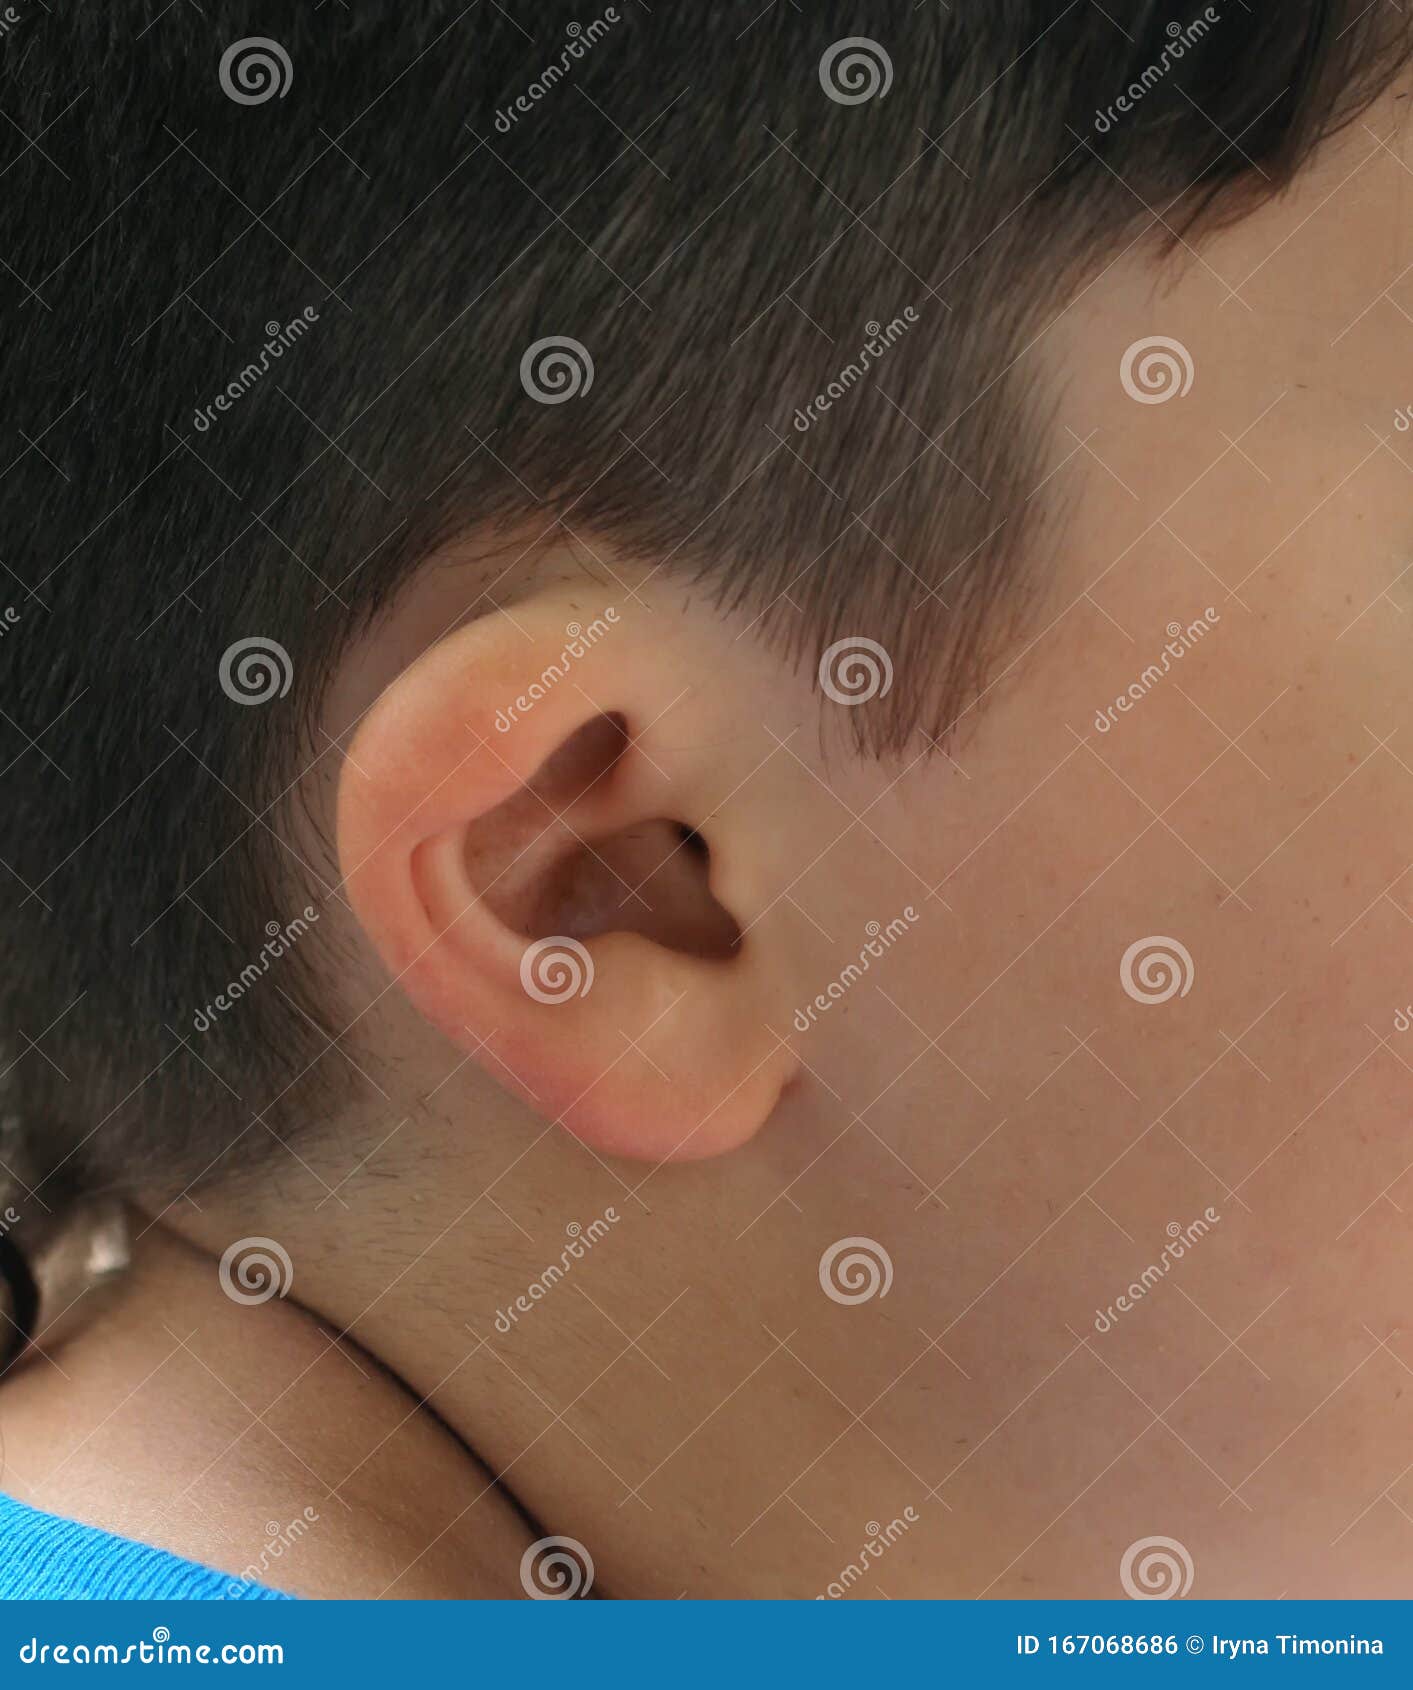 deformation of the ear. irregular  of the auricle.